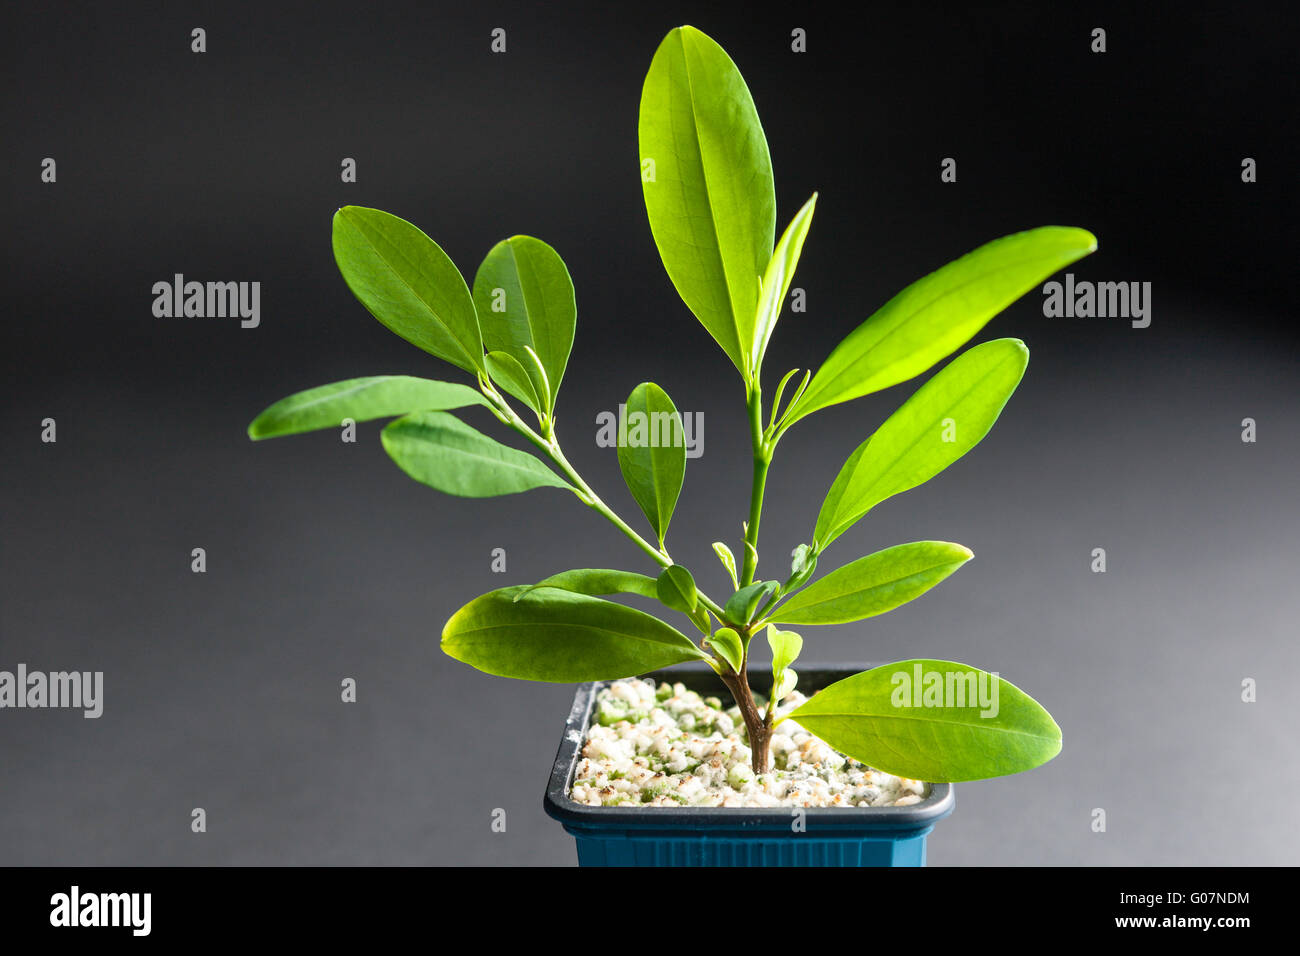 Coca plant growing in a tub Stock Photo